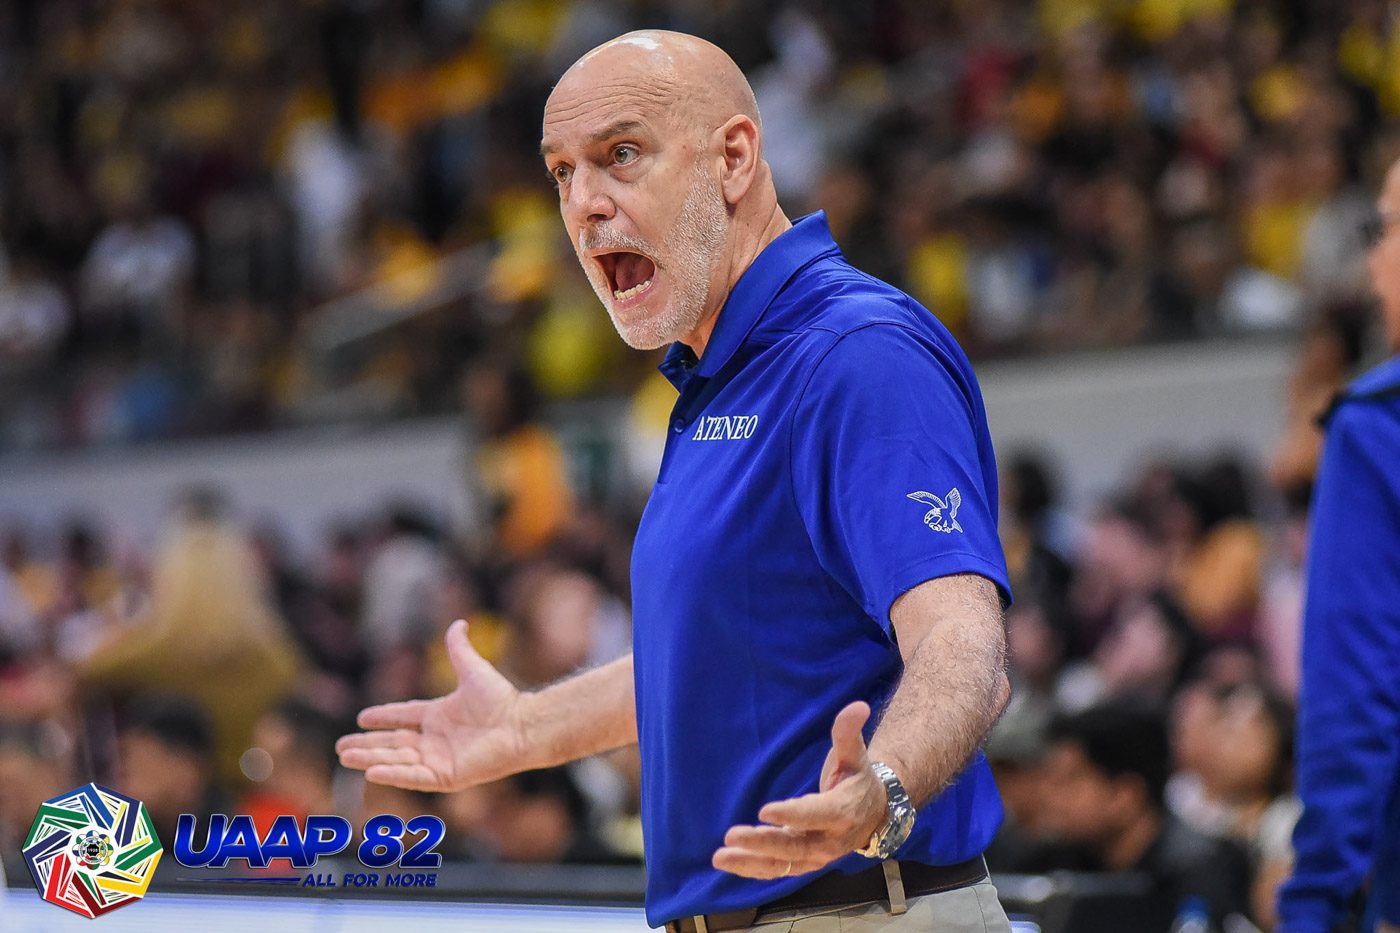 GAME PLAN. Ateneo coach Tab Baldwin says the team's 'execution of defensive schemes, toughness, understanding of UST's system from the scouting report' keyed the decisive triumph. Photo release  